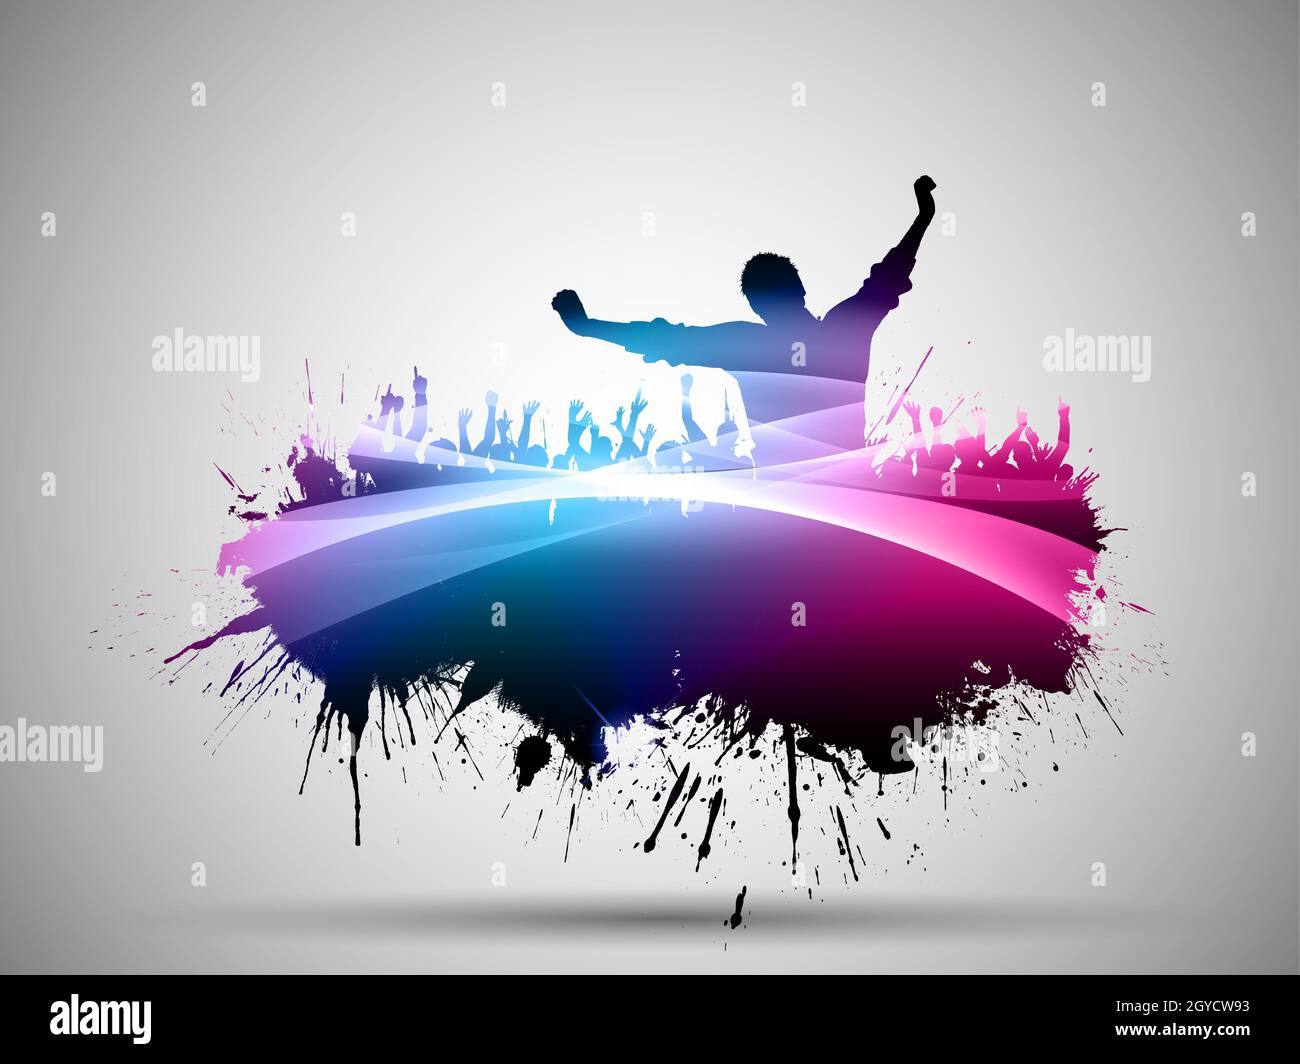 Silhouette of a grunge party crowd background Stock Photo